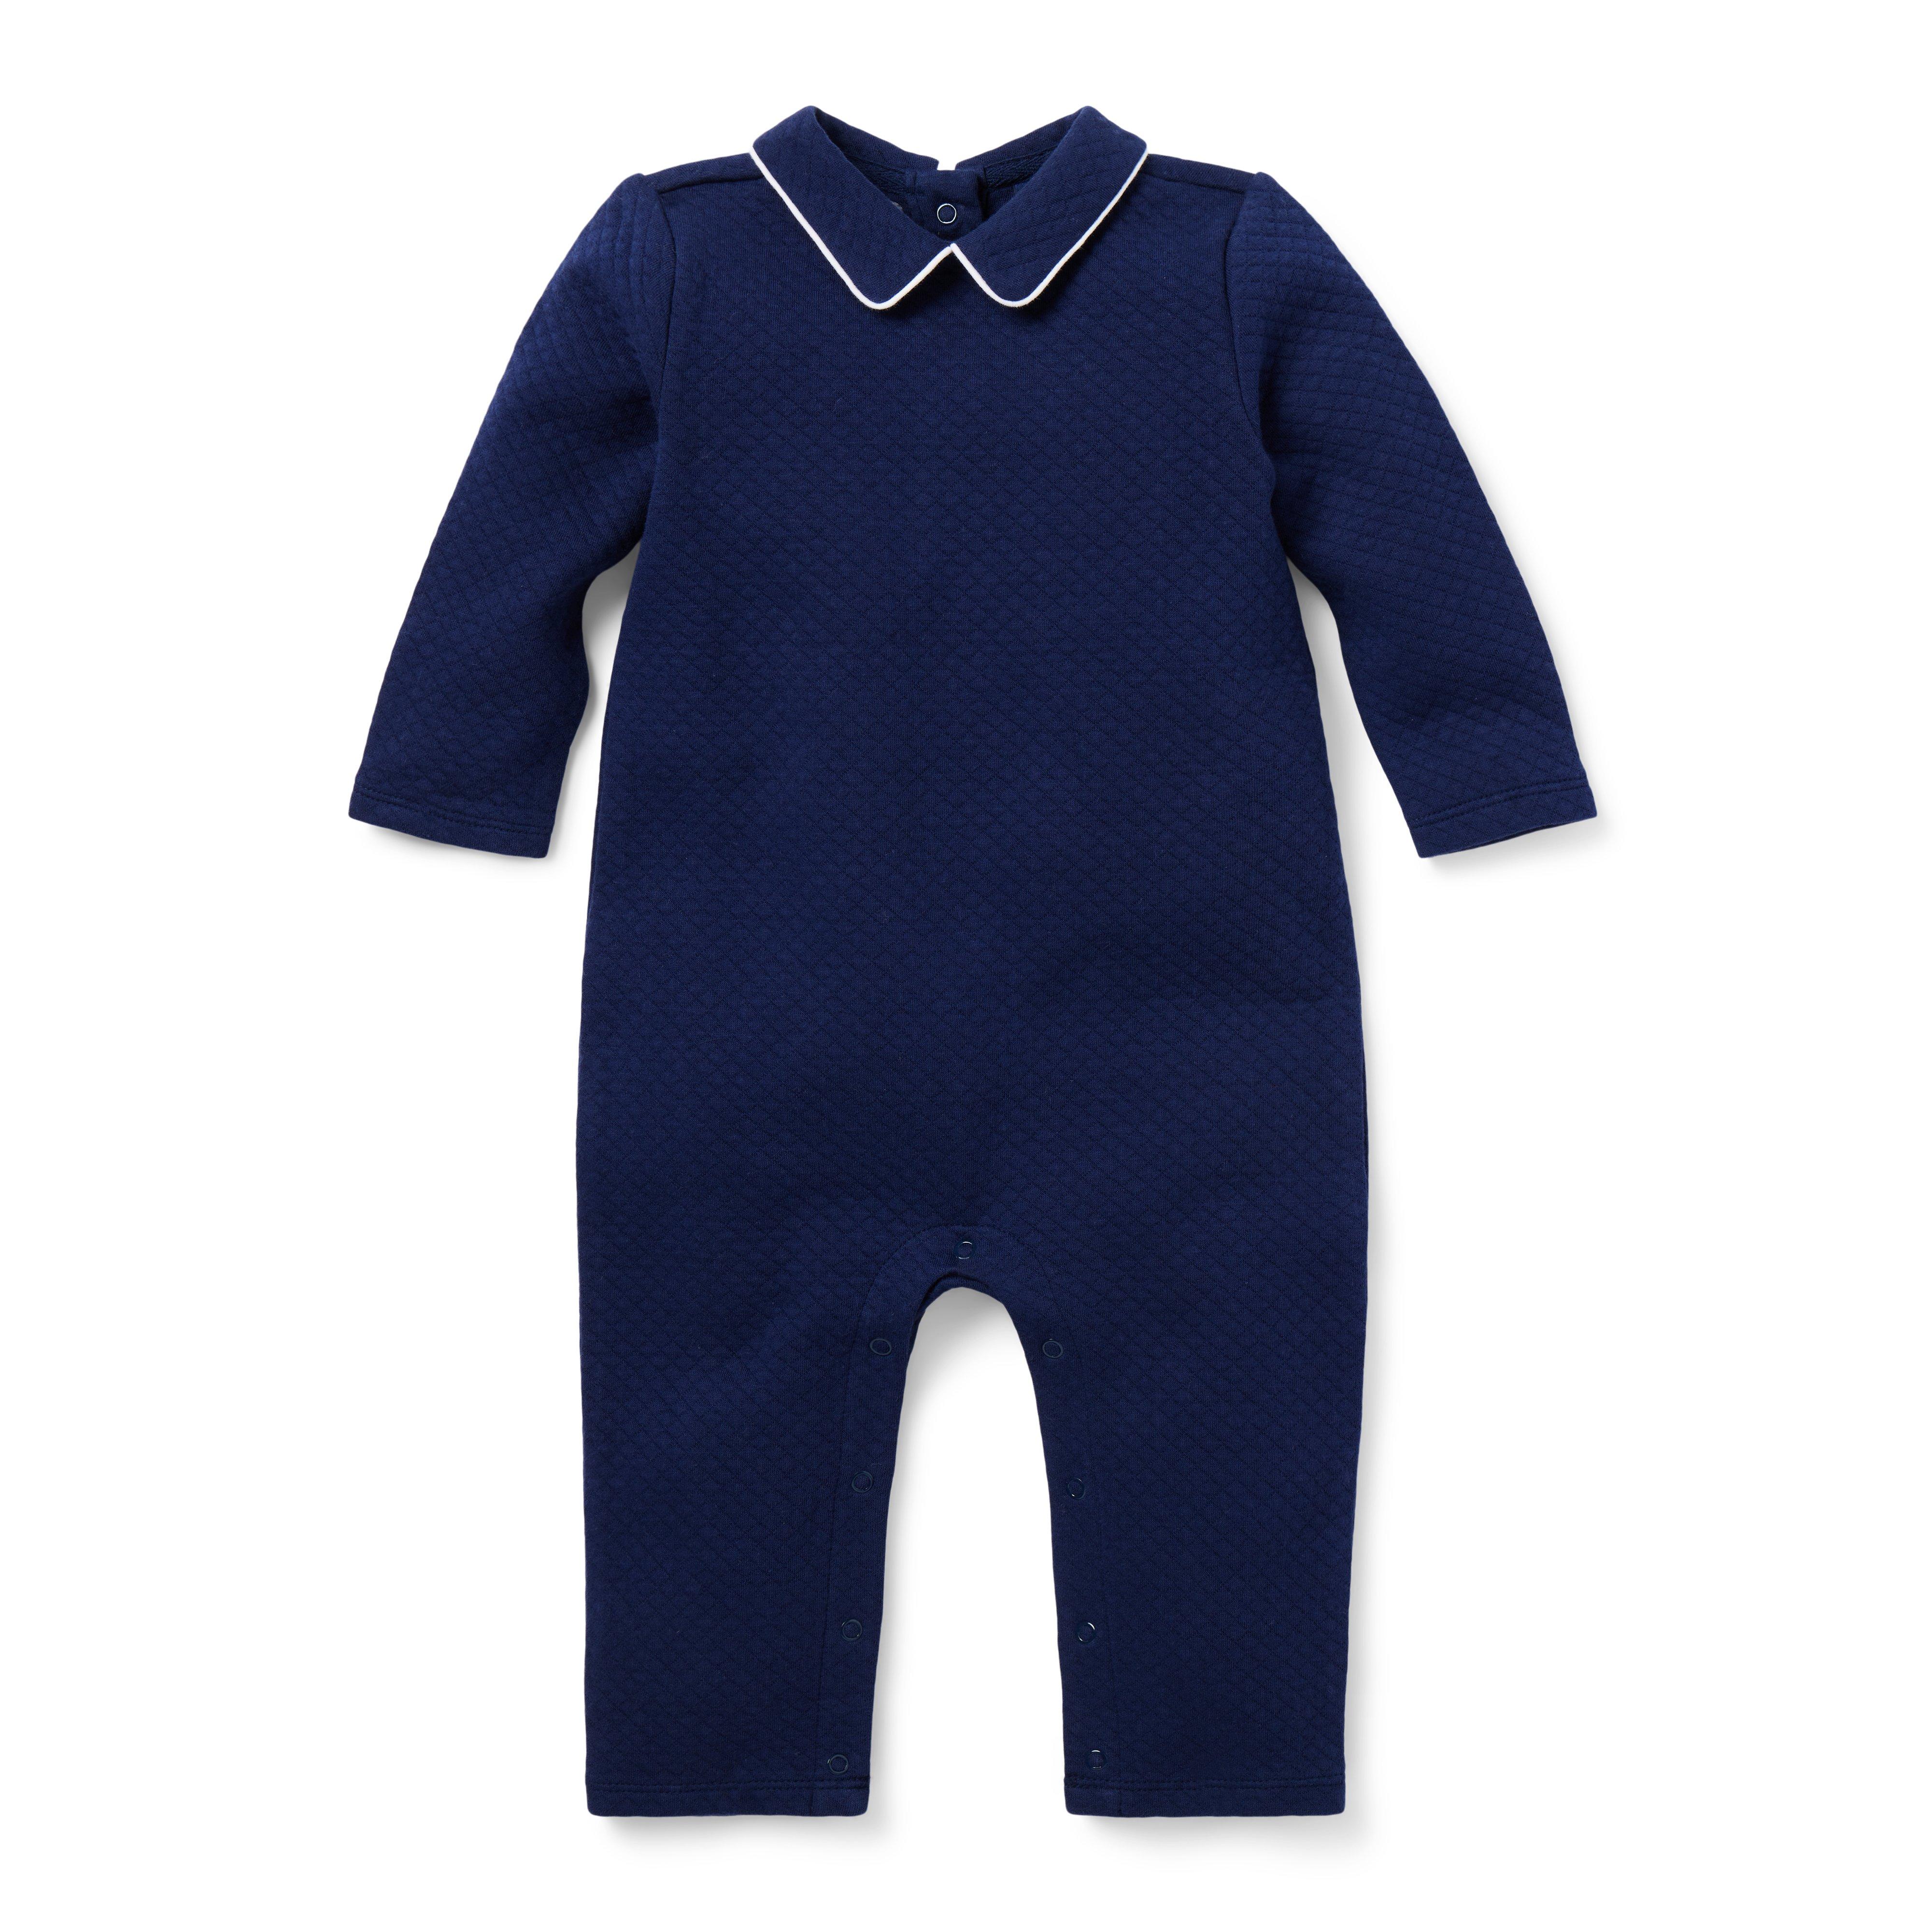 Newborn Merchant Marine Baby Collared Quilted One-Piece by Janie and Jack